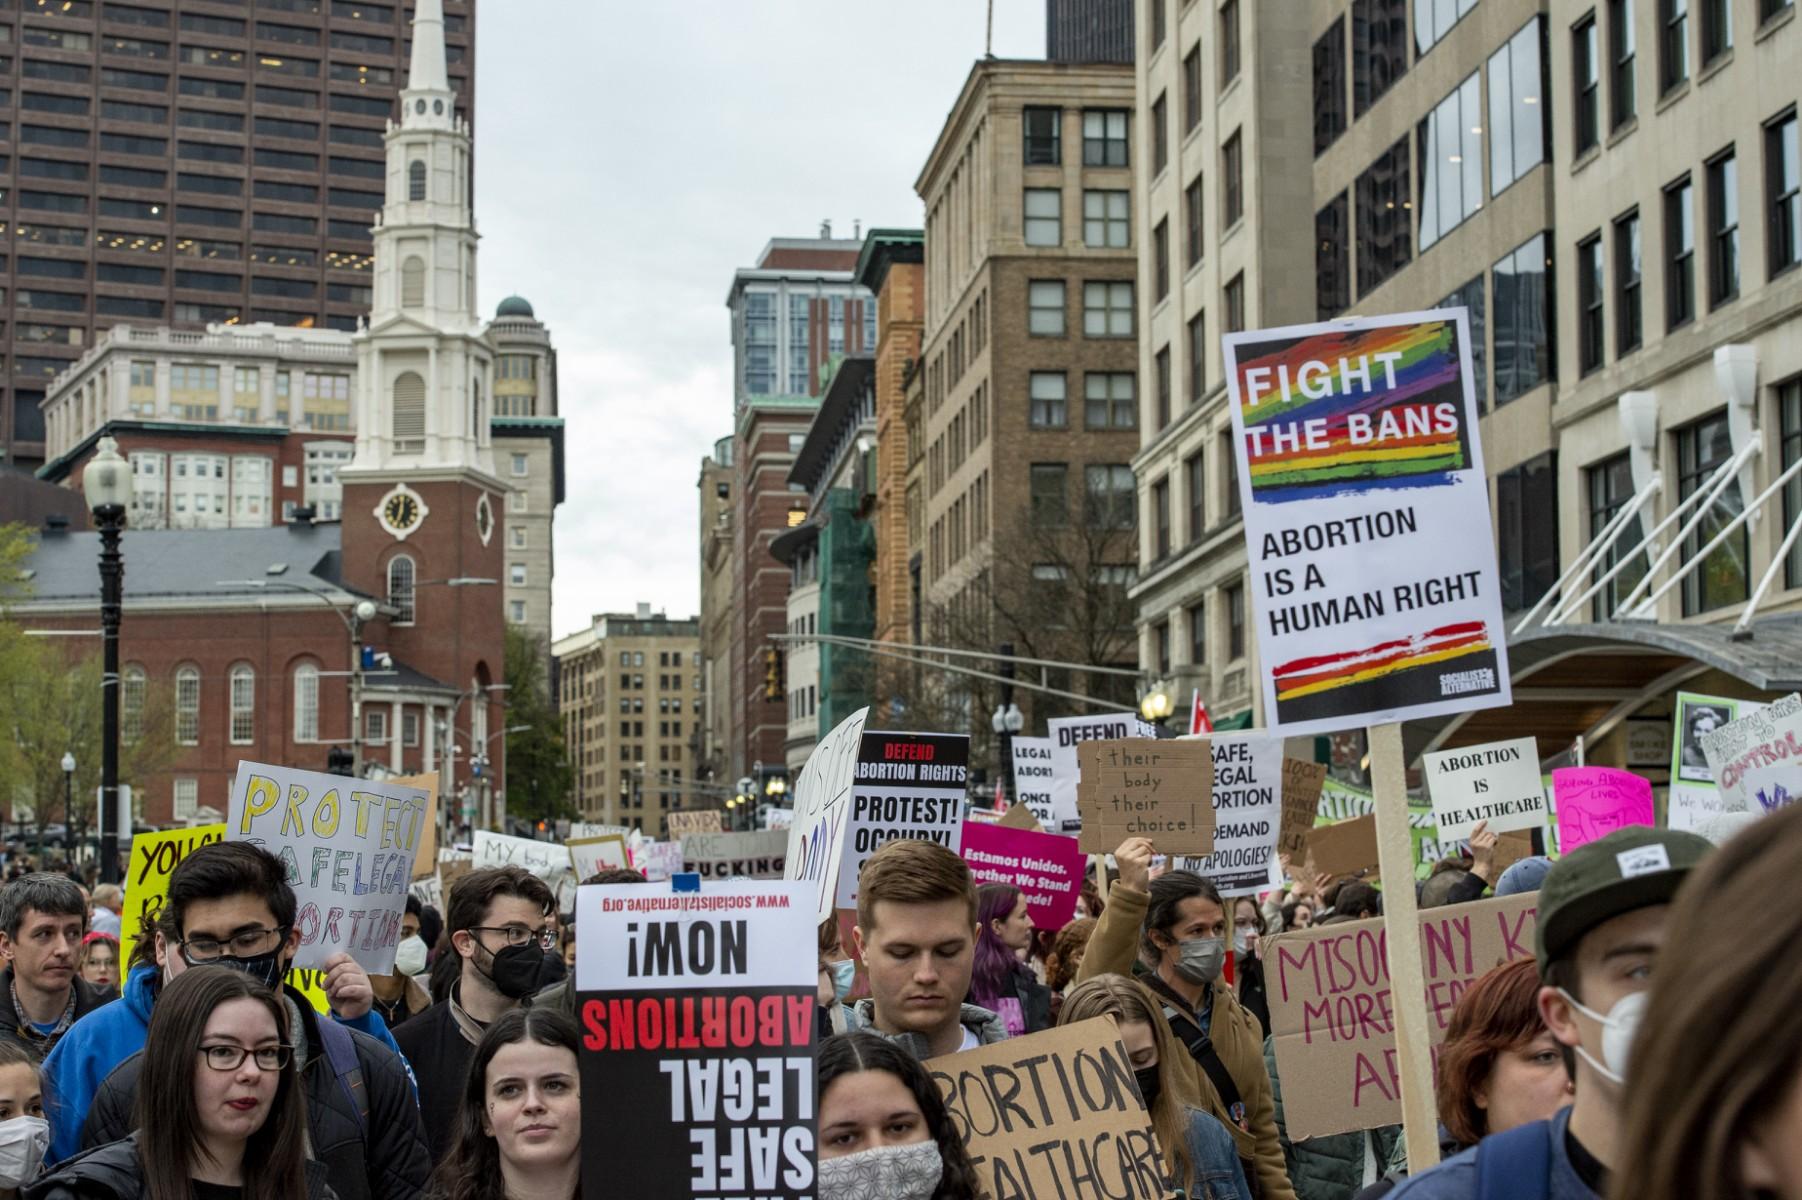 Demonstrators march through the streets of the city to show support and rally for abortion rights for women and trans people in Boston, Massachusetts on May 3. Photo: AFP